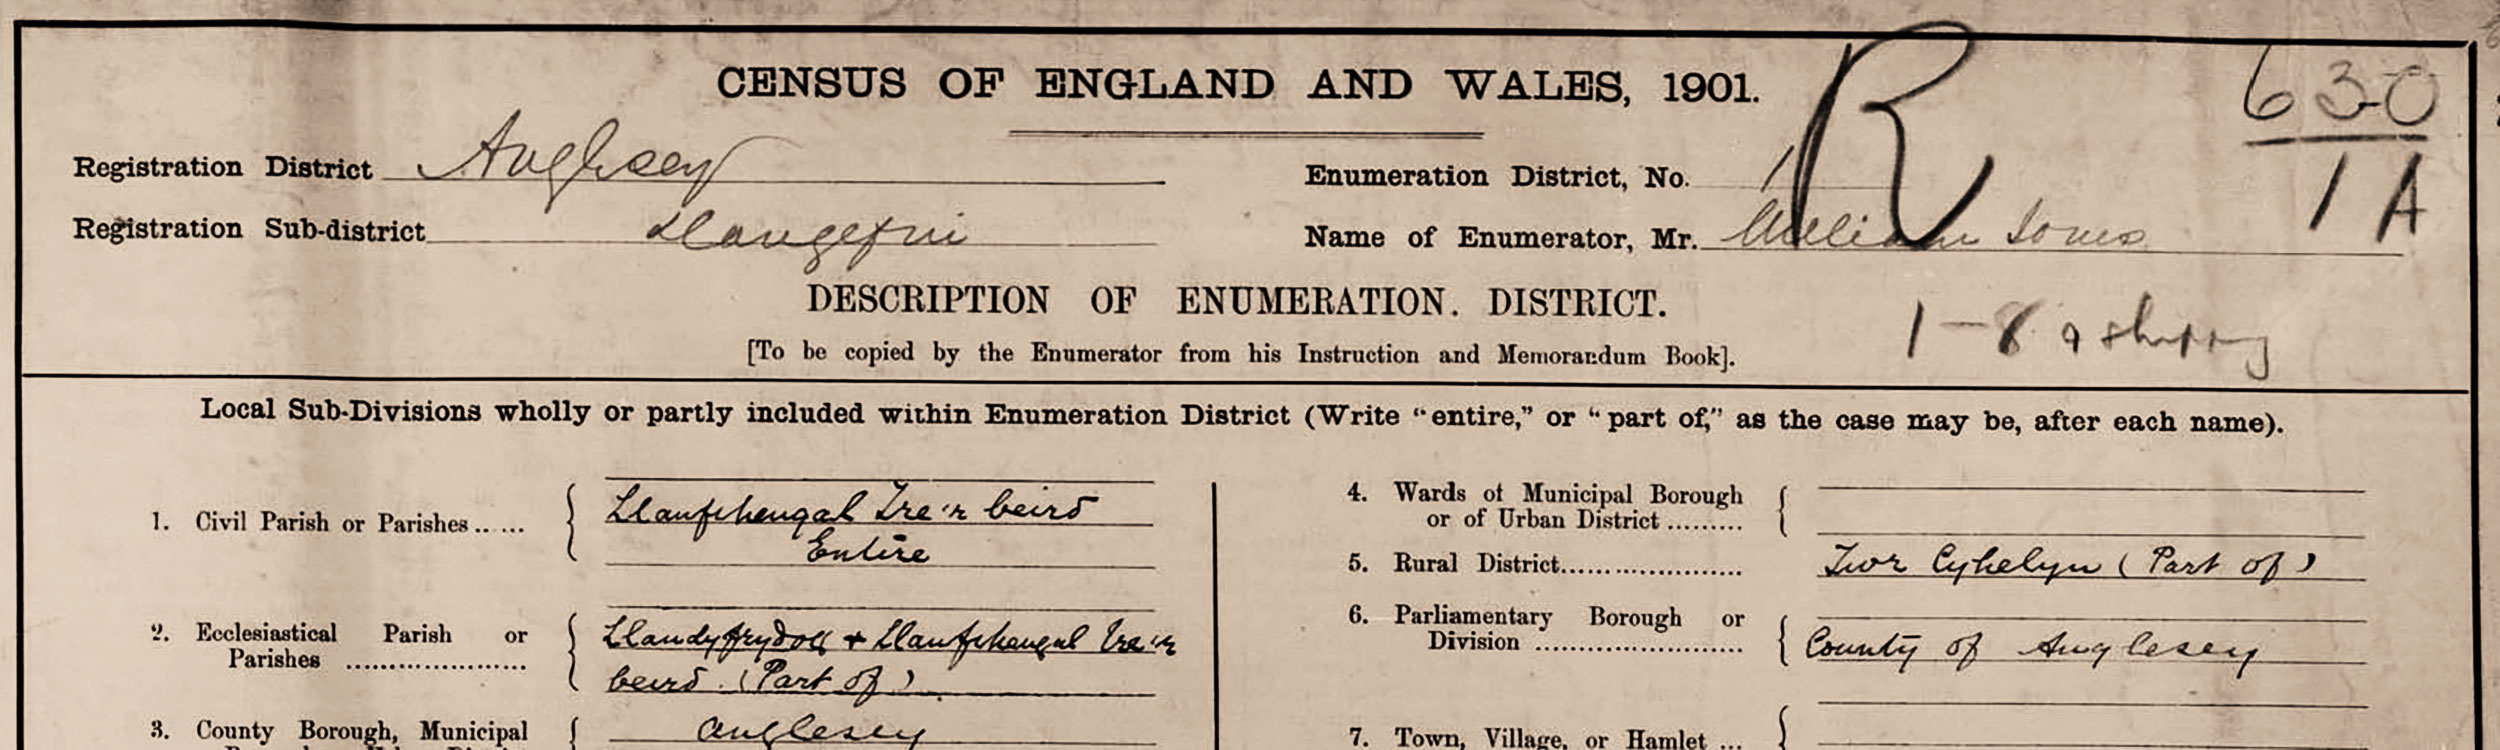 Census 1901 Anglesey